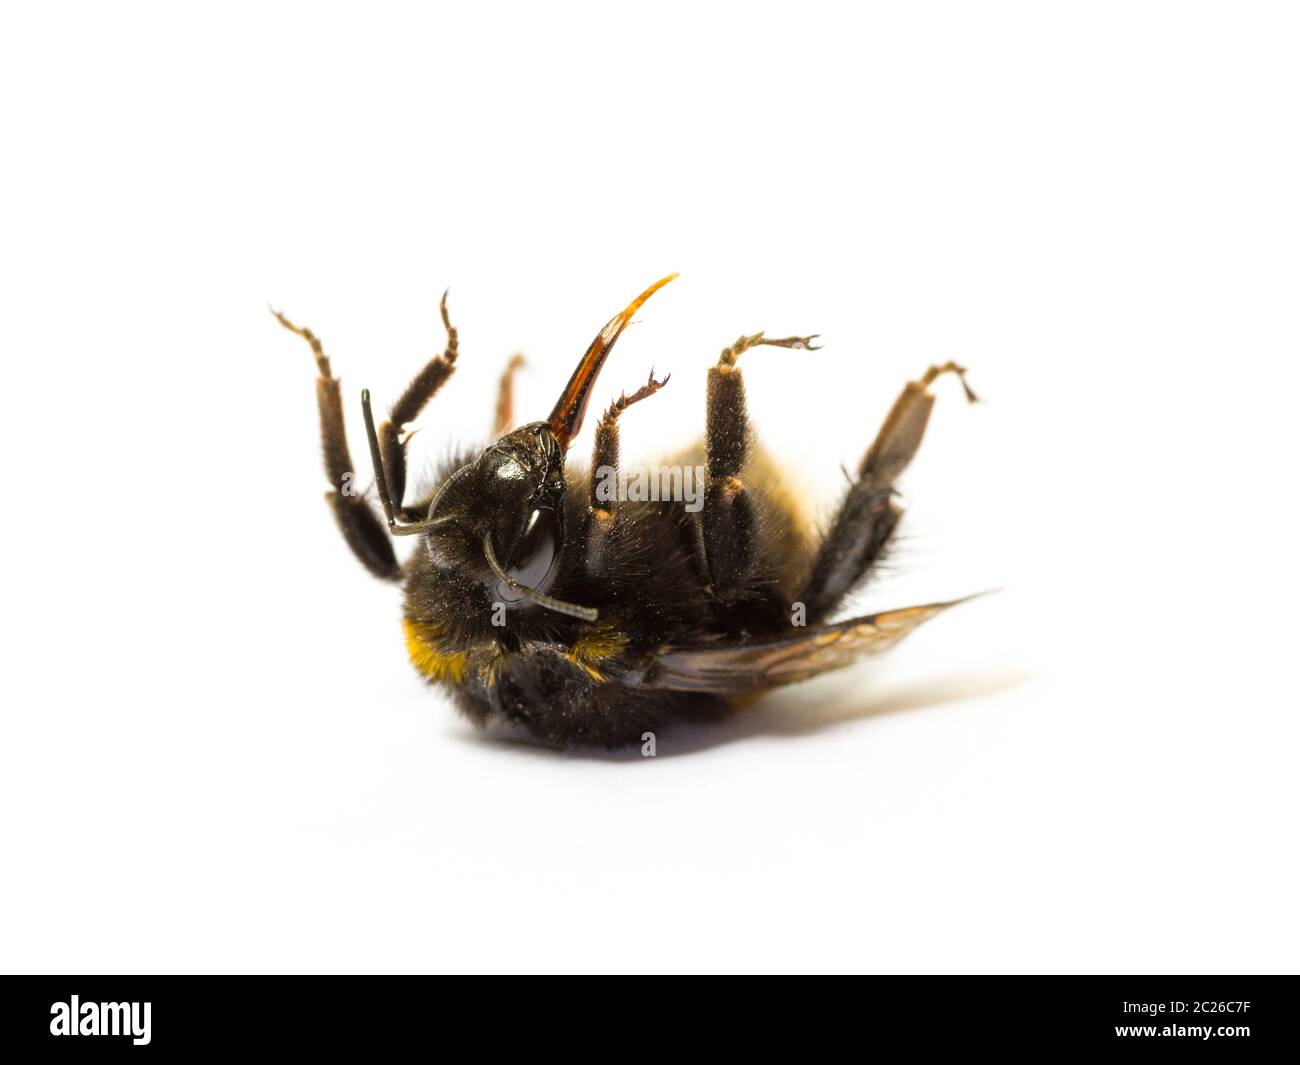 Dead bumblebee lying on her back isolated on white background. Insect death and environmentel protection concept. Stock Photo